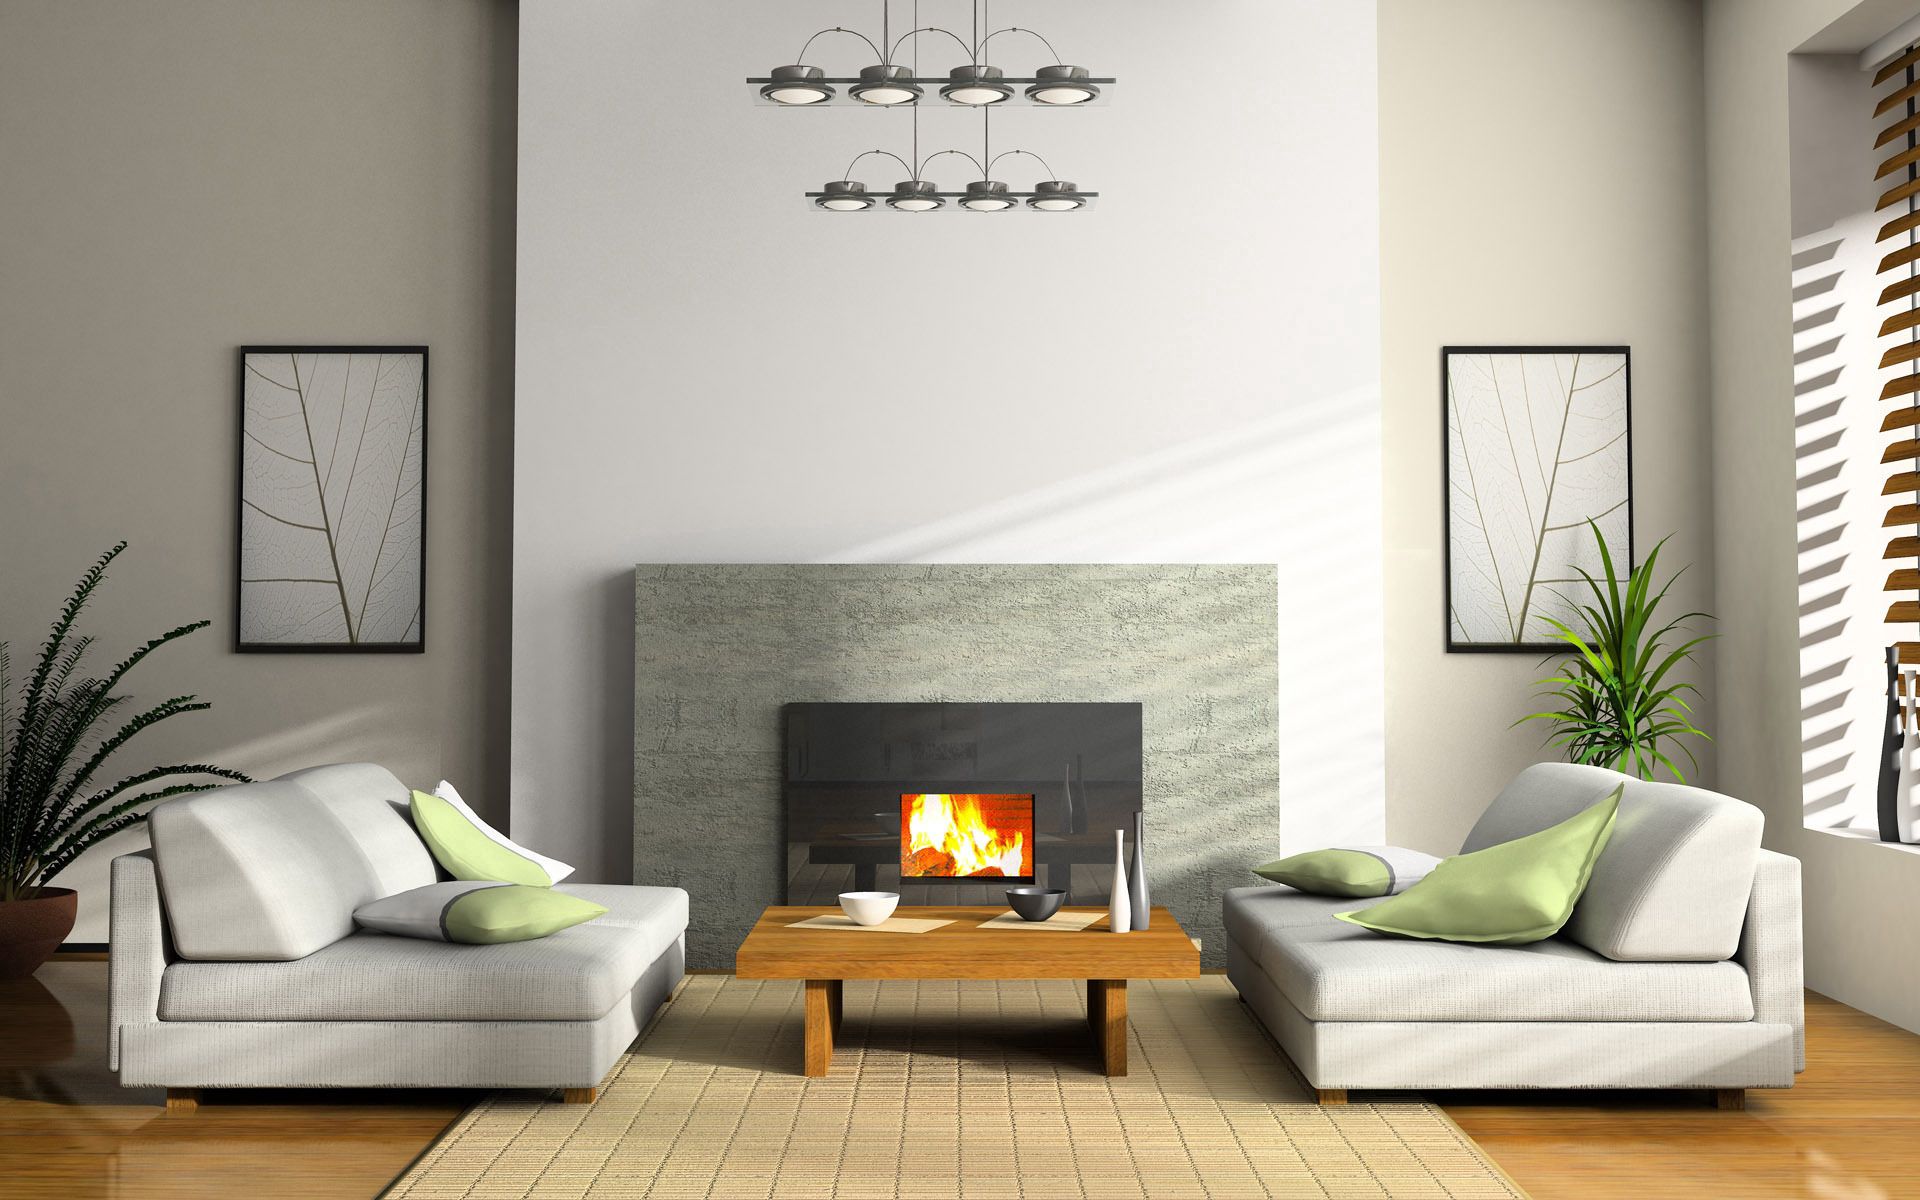 design, interior, plants, fire, paintings, miscellanea, miscellaneous, cup, table, room, vase, style, sofa, armchair, paper, fireplace, apartment, flat